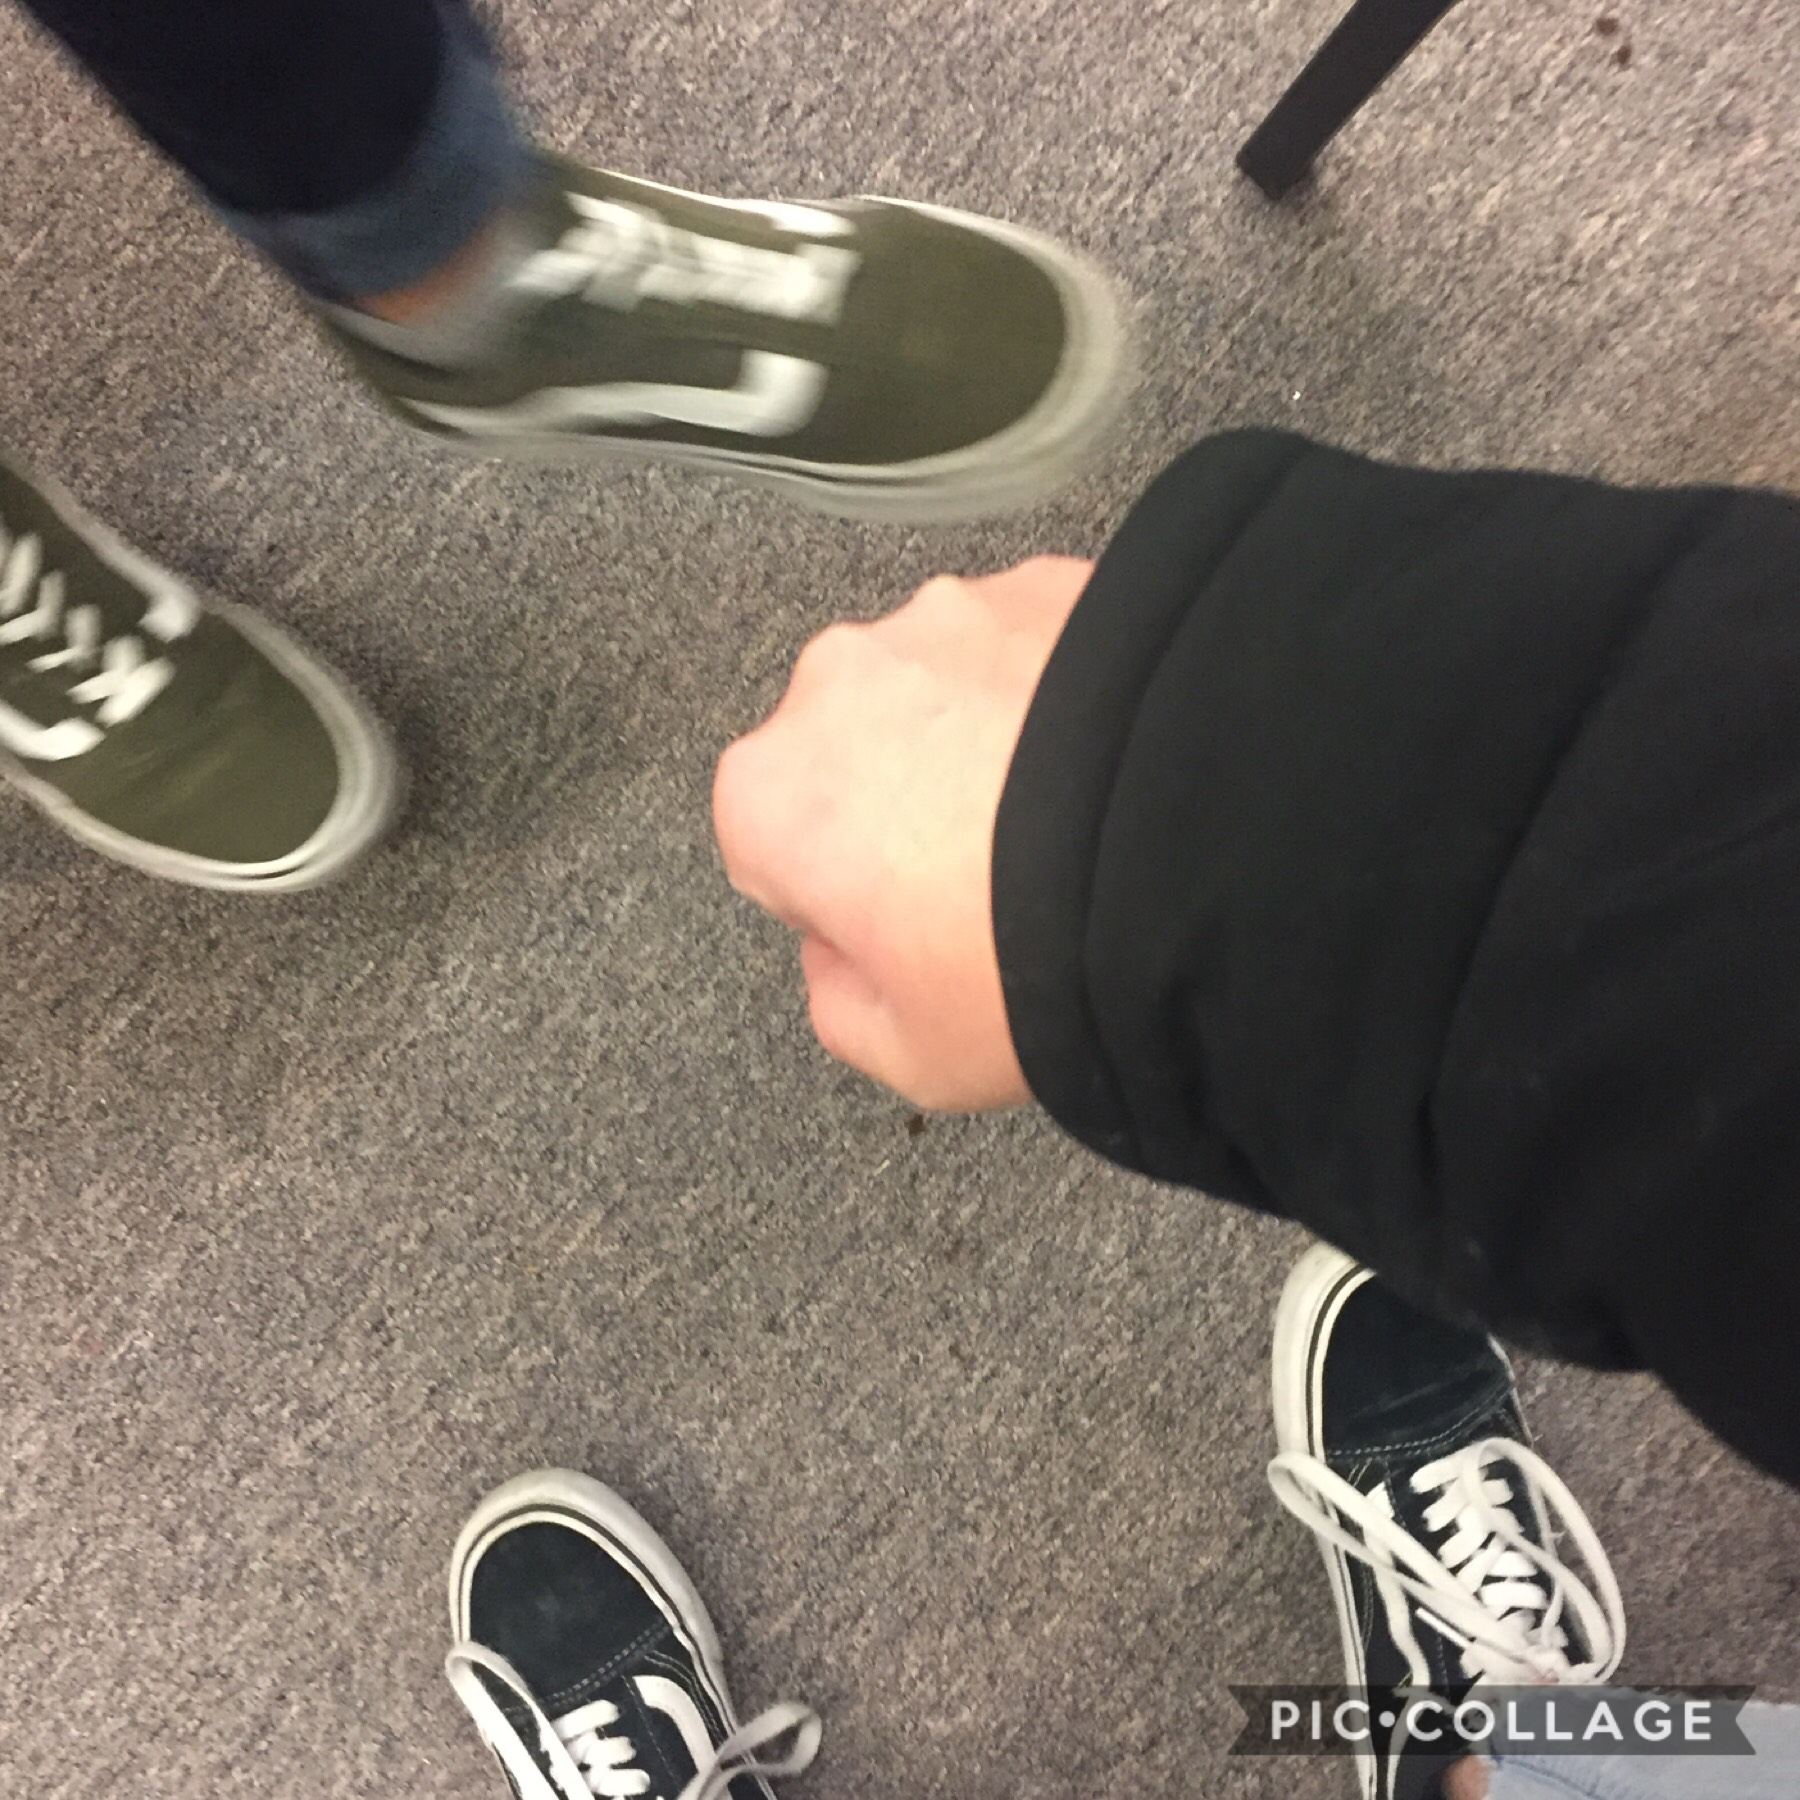 im wearing kyle’s jacket:)) and look at my friend jaida’s feet. how quaint😌
im slowly starting to reach a better place mentally and it’s pretty sick ngl. also ffû čk îñg ron carter is coming to our school tomorrow to work with the jazz band!!!